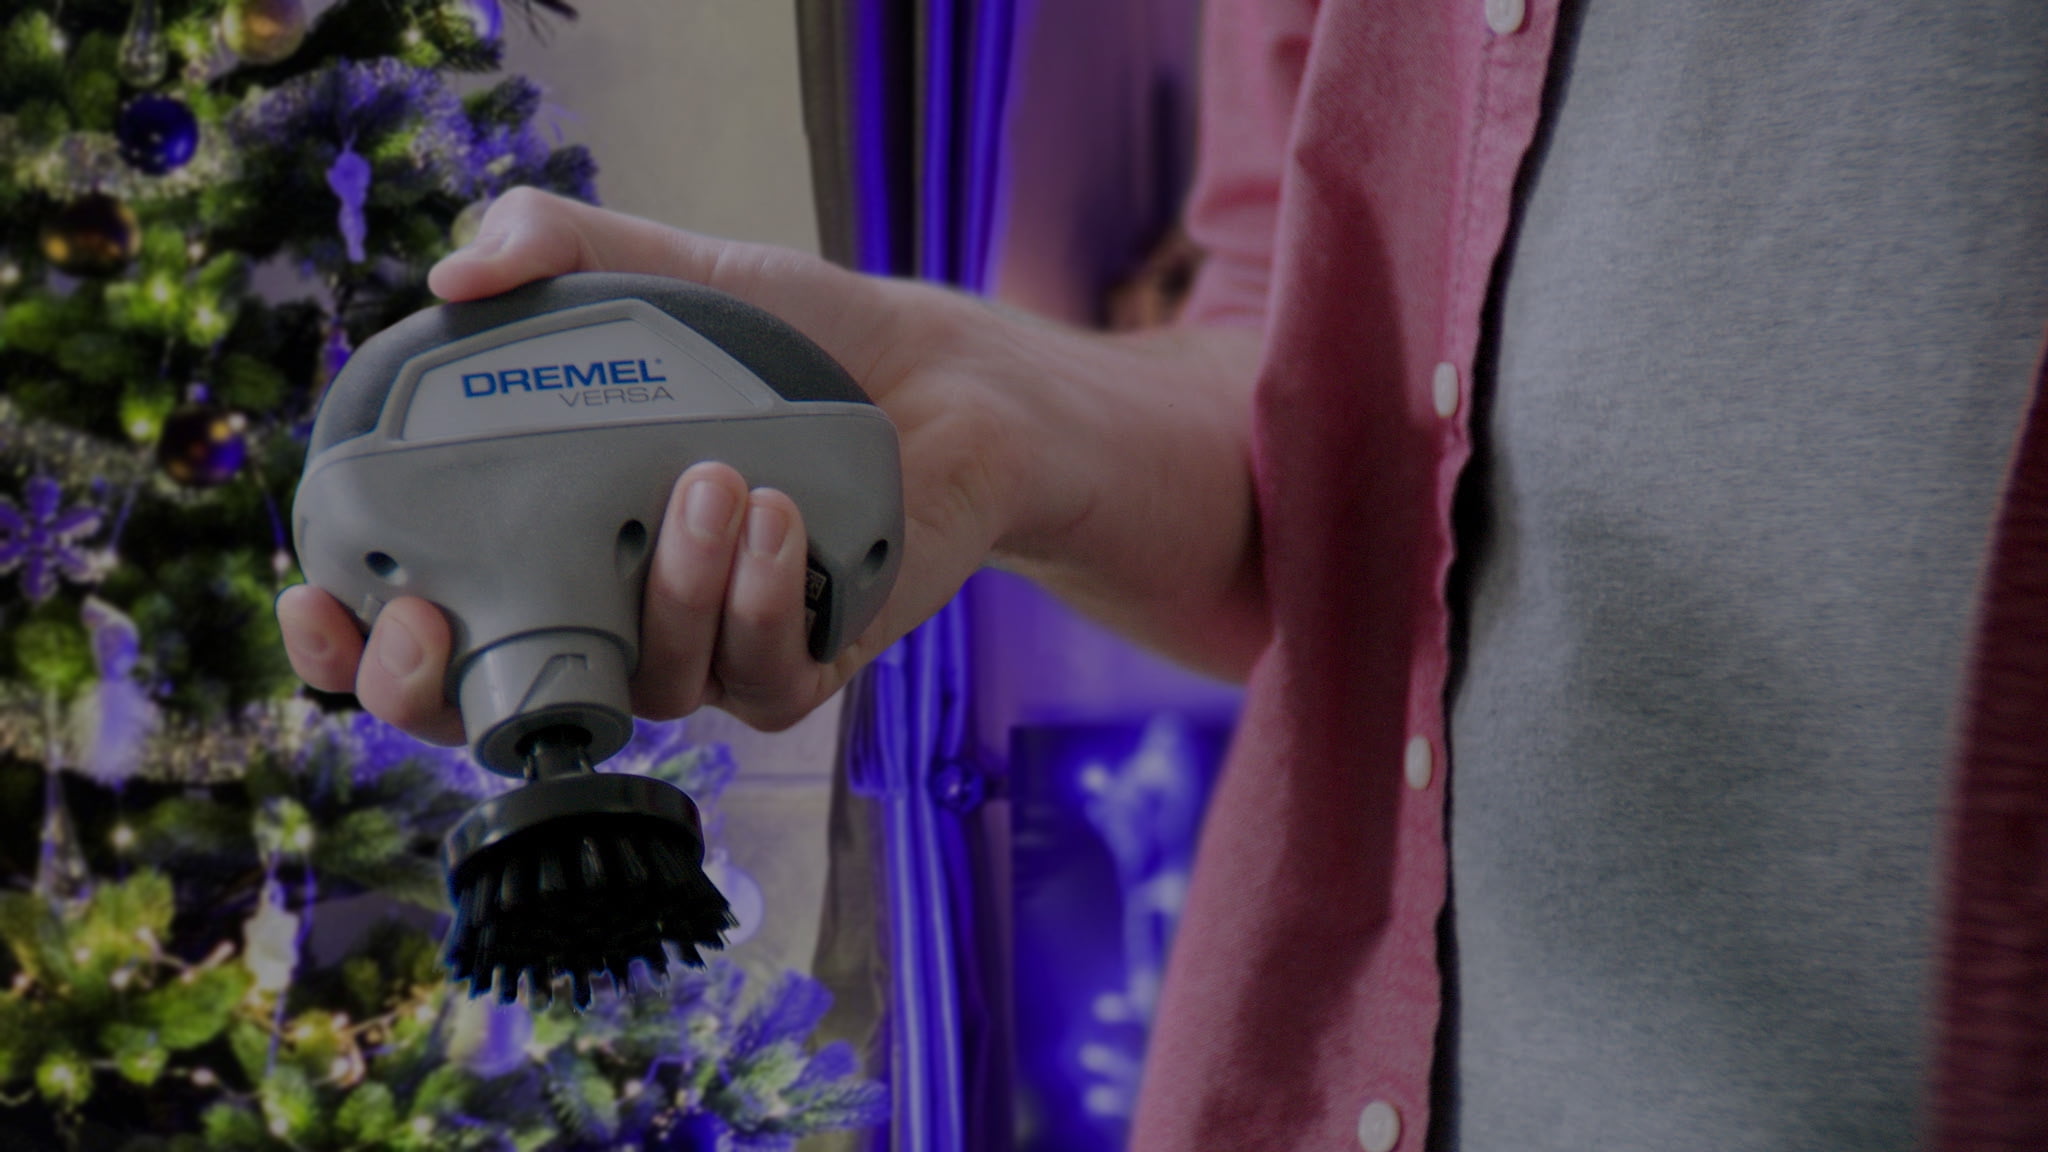 Dremel Versa Power Tool Sinks, Stoves, Auto, Kit Tubs, & for Grills Tile, Bathrooms, Pans, Cleaning